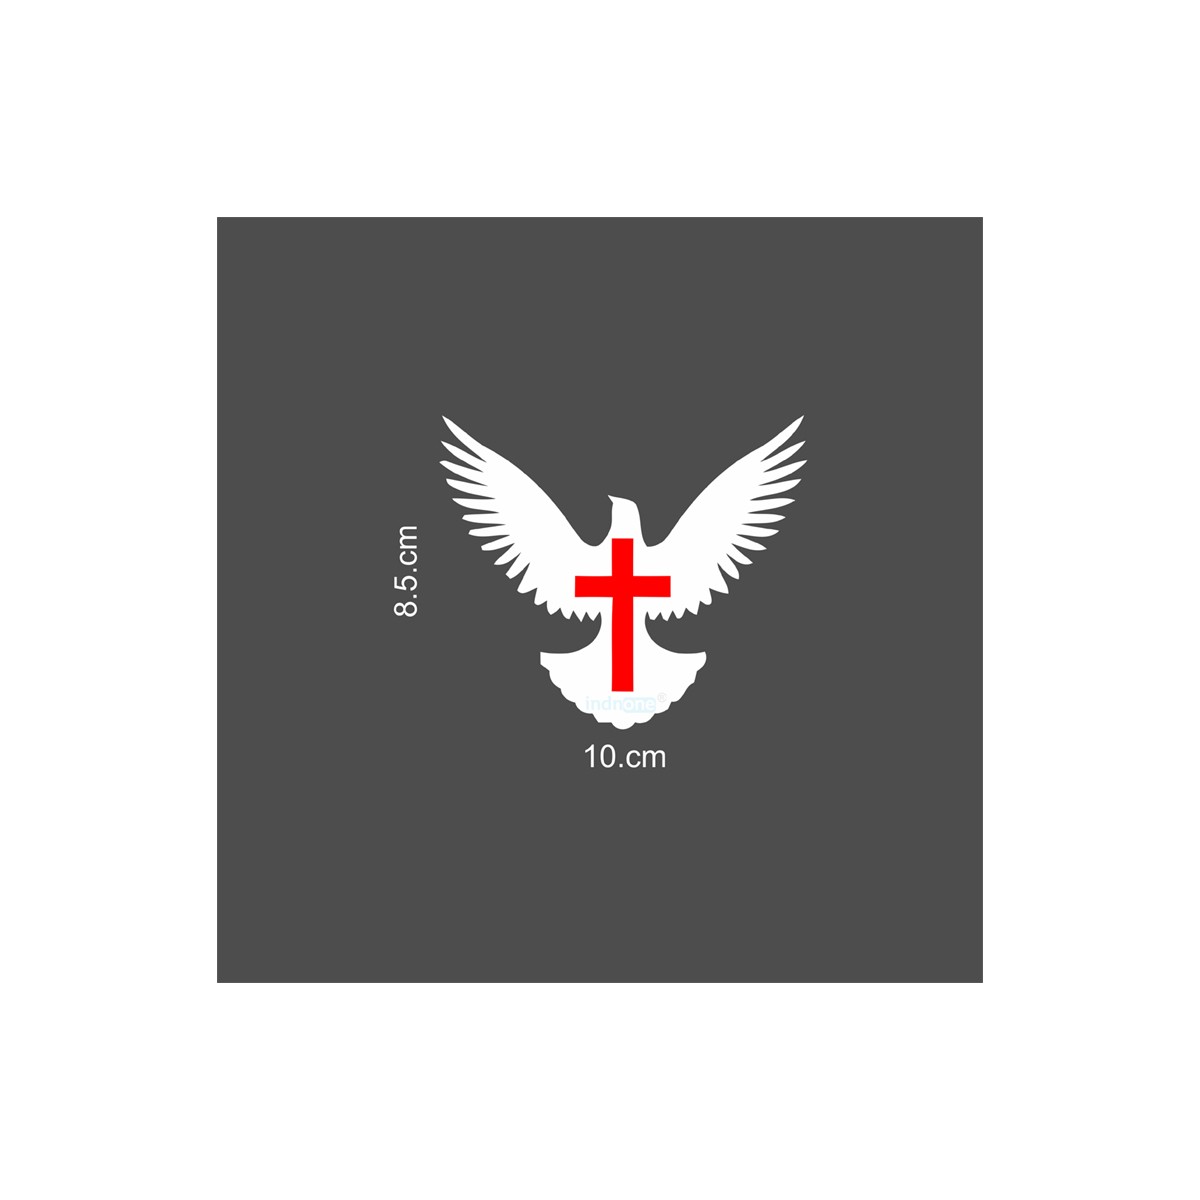 indnone® Lord Jesus Pigeon Wings Sticker for Bike Water Proof PVC Vinyl Decal Sticker | White & Red Color Standard Size